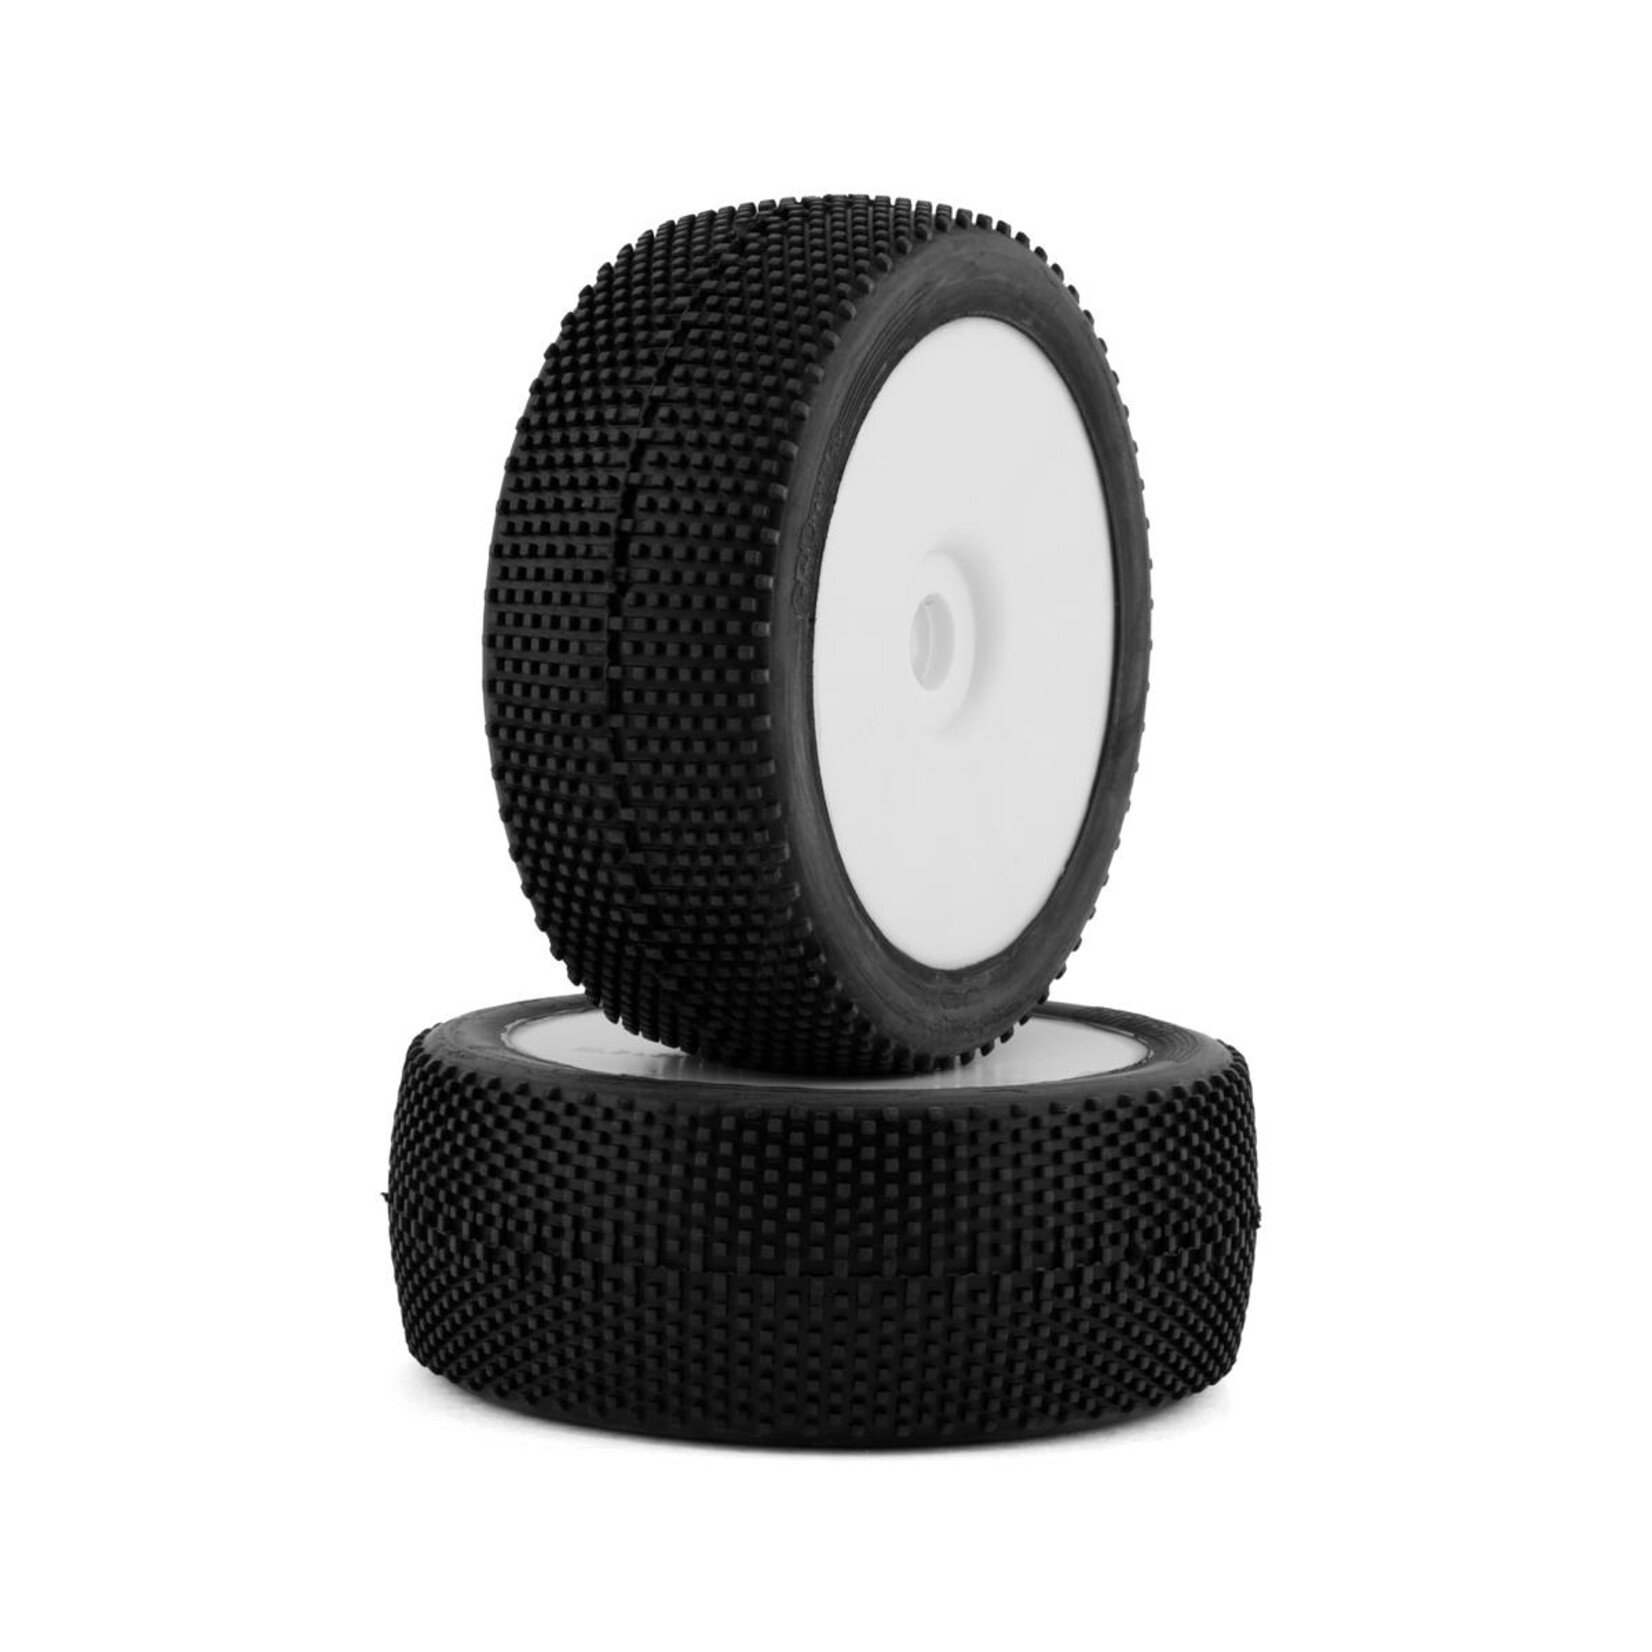 GRP GRP Cubic Pre-Mounted 1/8 Buggy Tires (2) (White) (Medium) #GBX03B